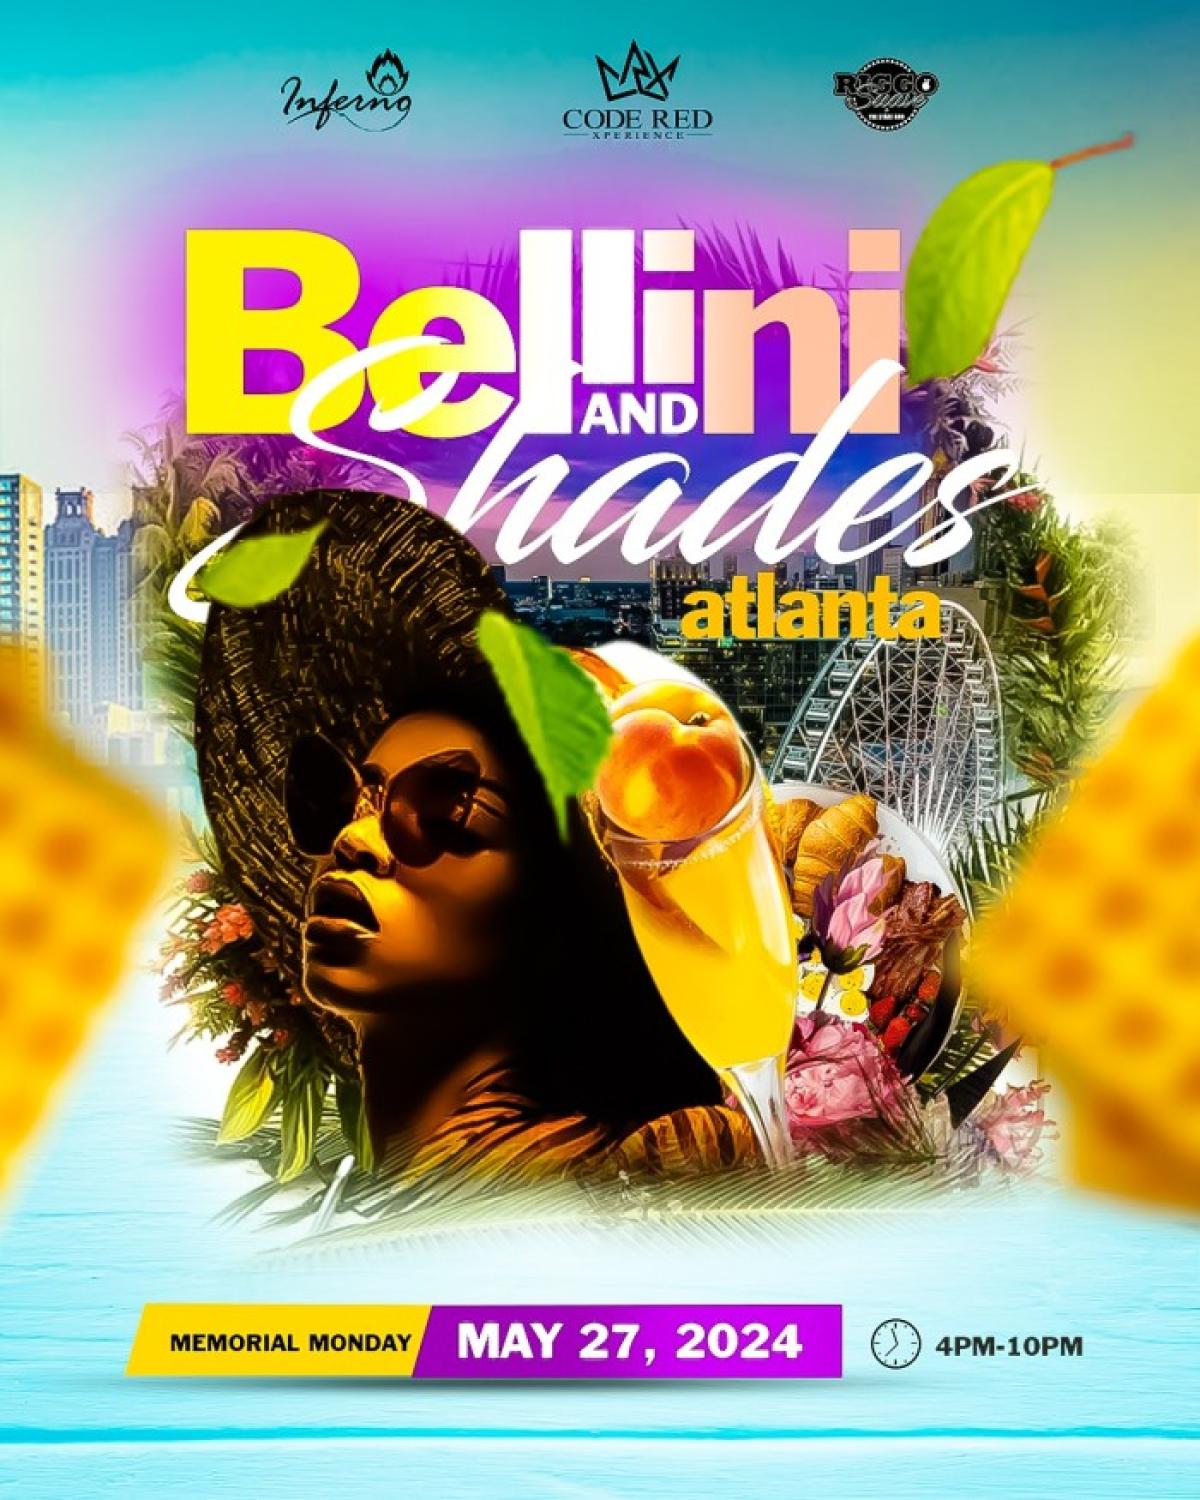 Bellini & Shades flyer or graphic.